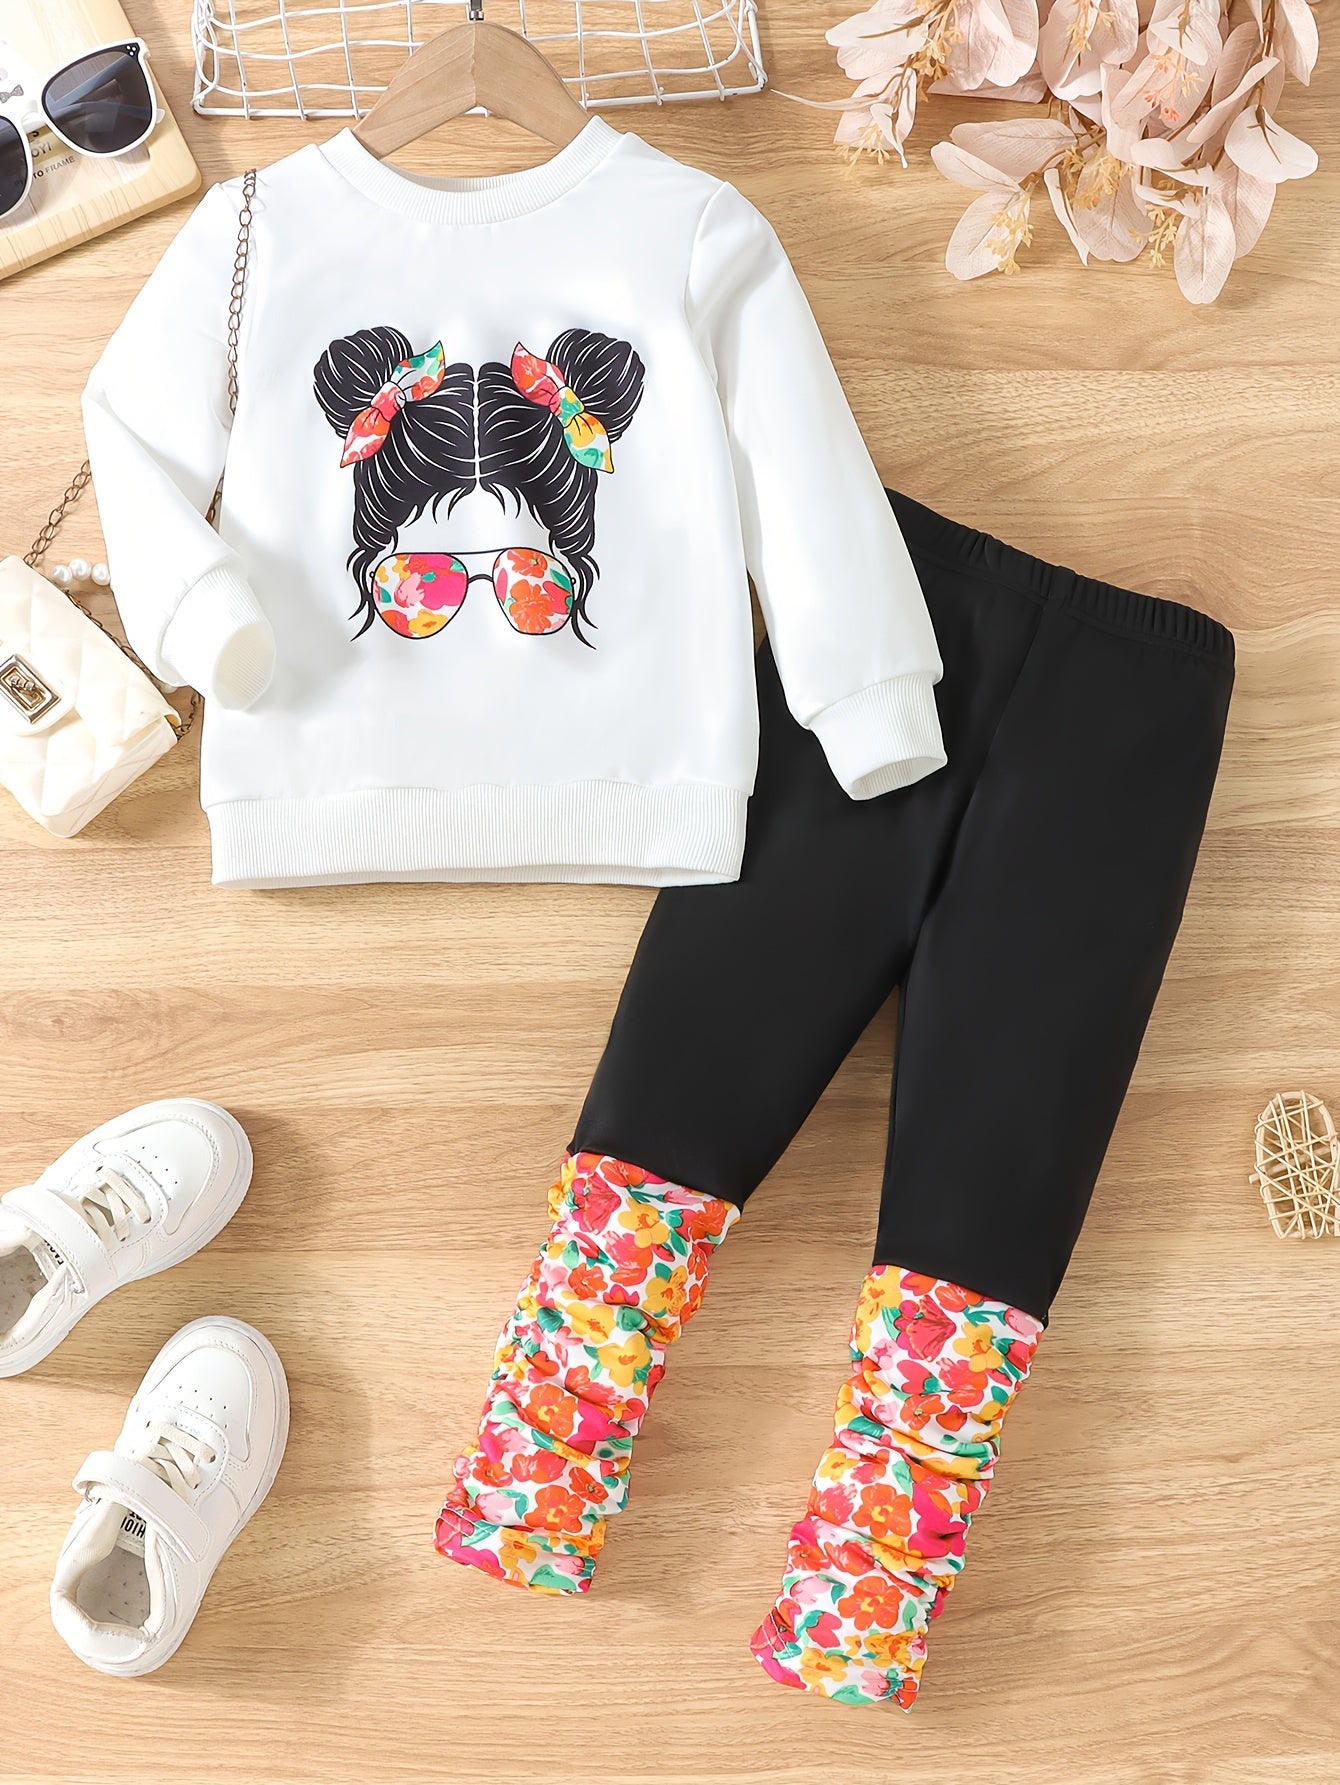 Girl's Floral Pattern Outfit 2pcs, Portrait Graphic Sweatshirt & Pants Set, Kid's Clothes For Spring Fall